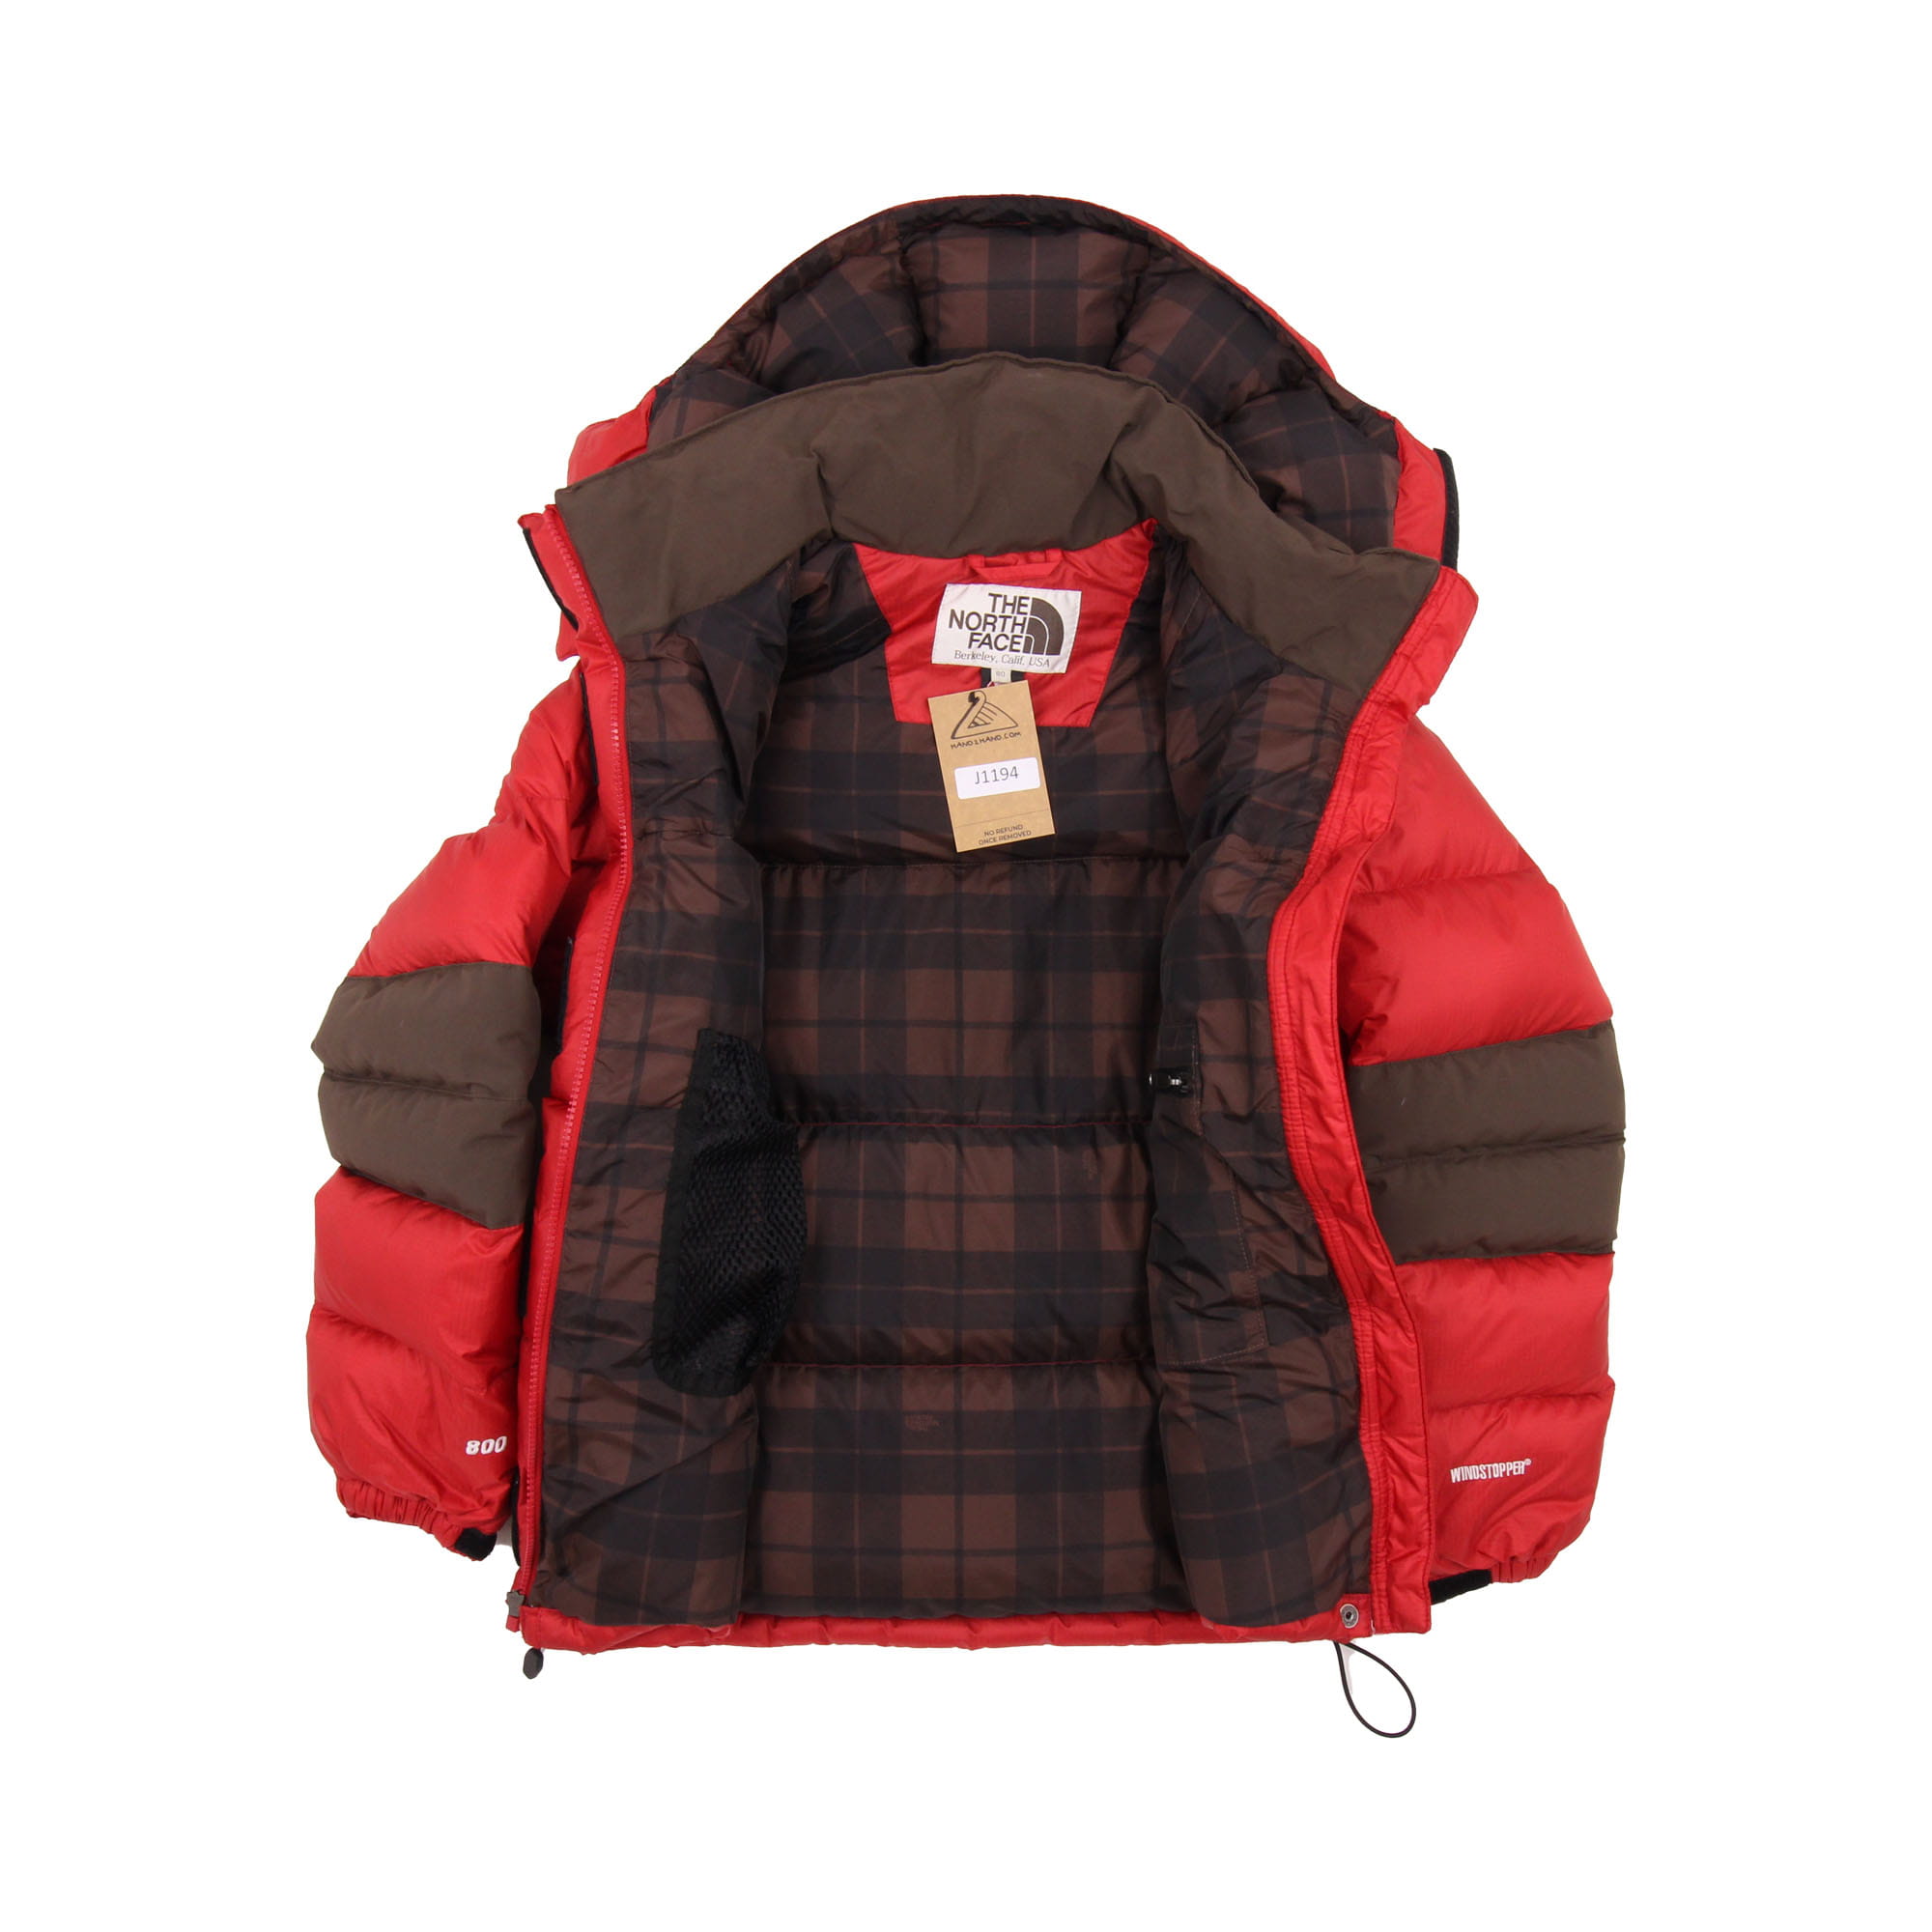 The North Face 800 Puffer Jacket -  XS